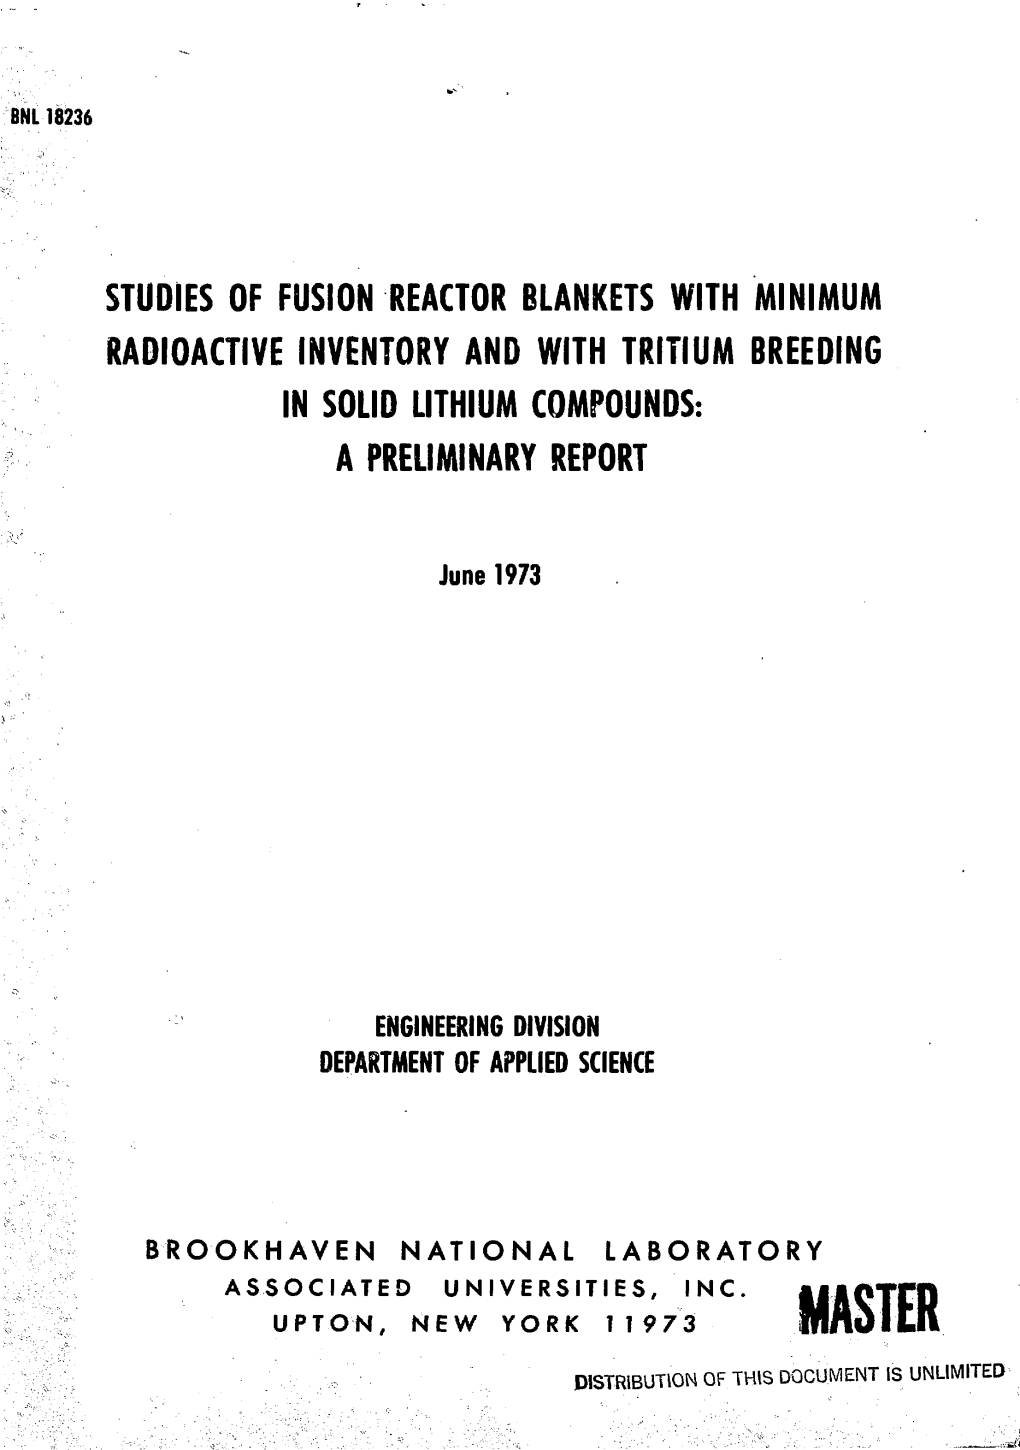 Studies of Fusion Reactor Blankets with Minimum Radioactive Inventory and with Tritium Breeding in Solid Lithium Compounds: a Preliminary Report